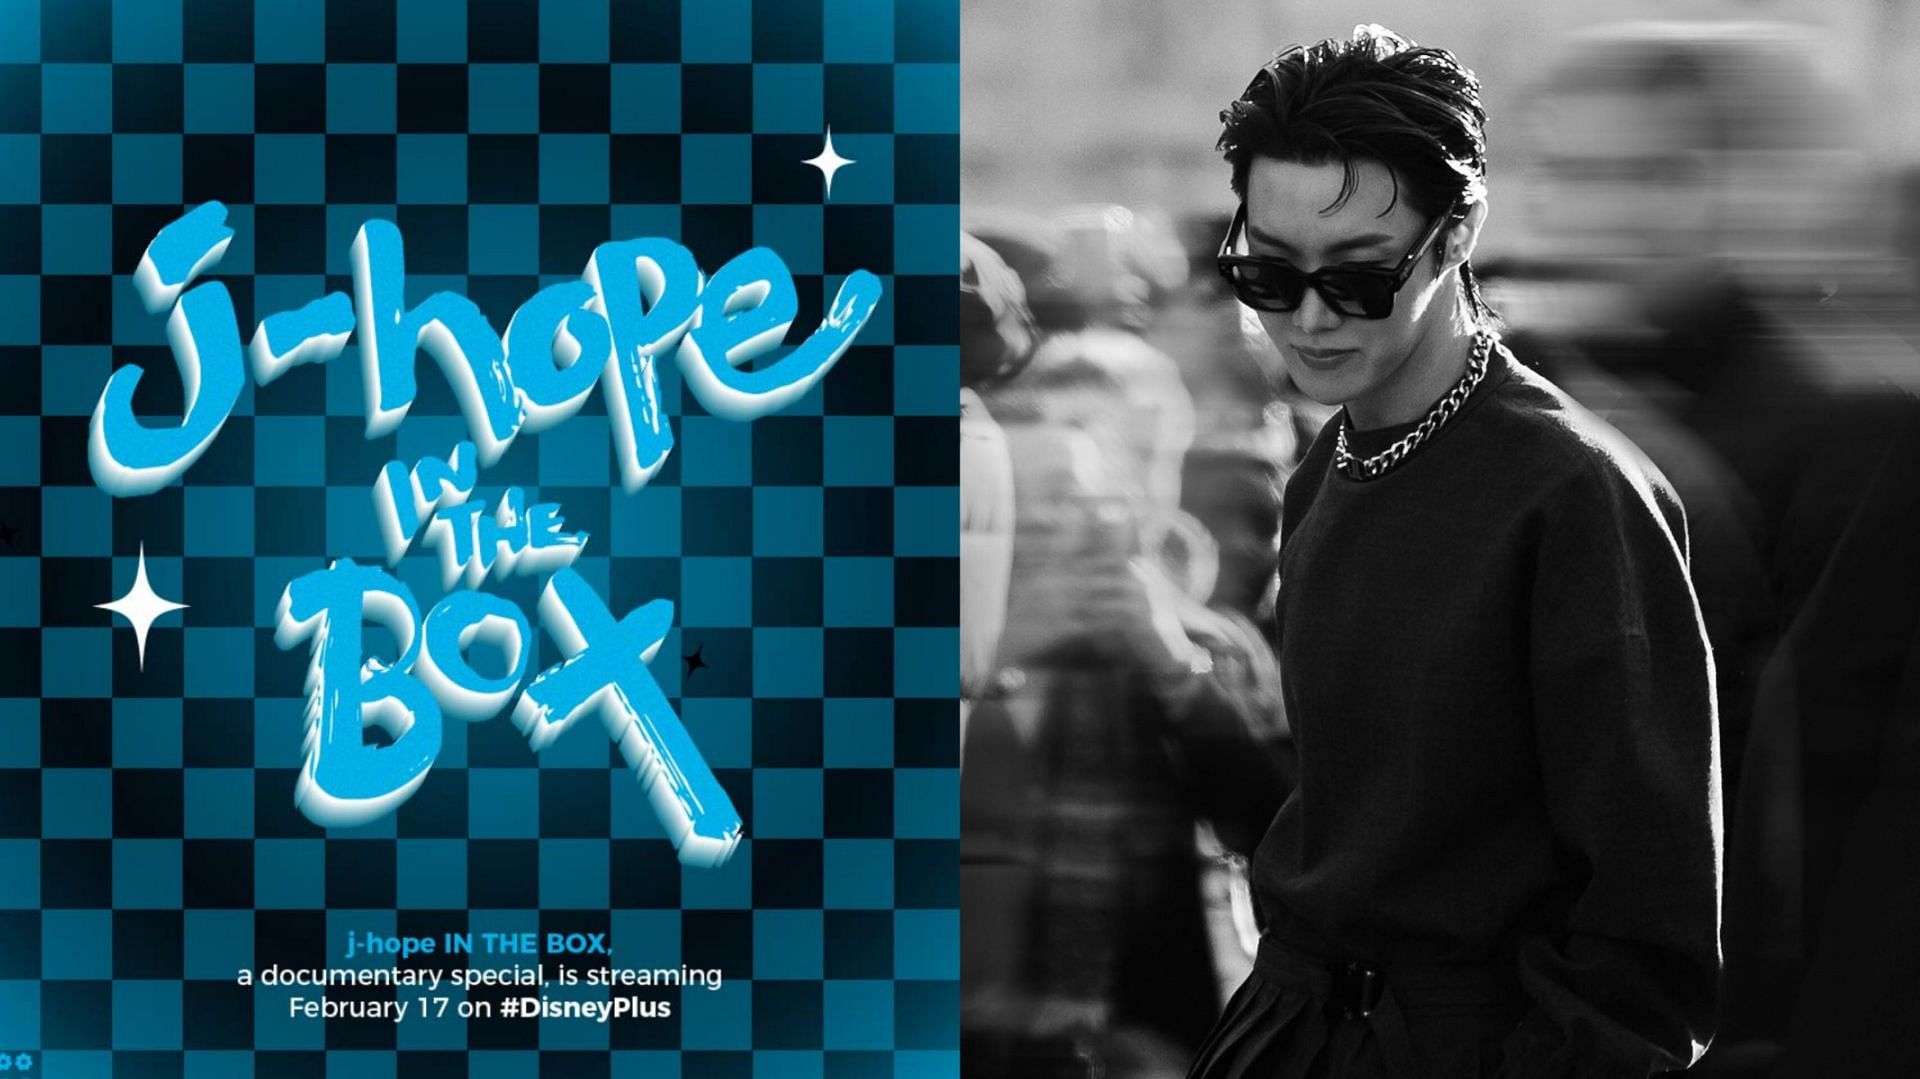 Documentary 'J-Hope in the Box' on BTS J-Hope Release Date Revealed